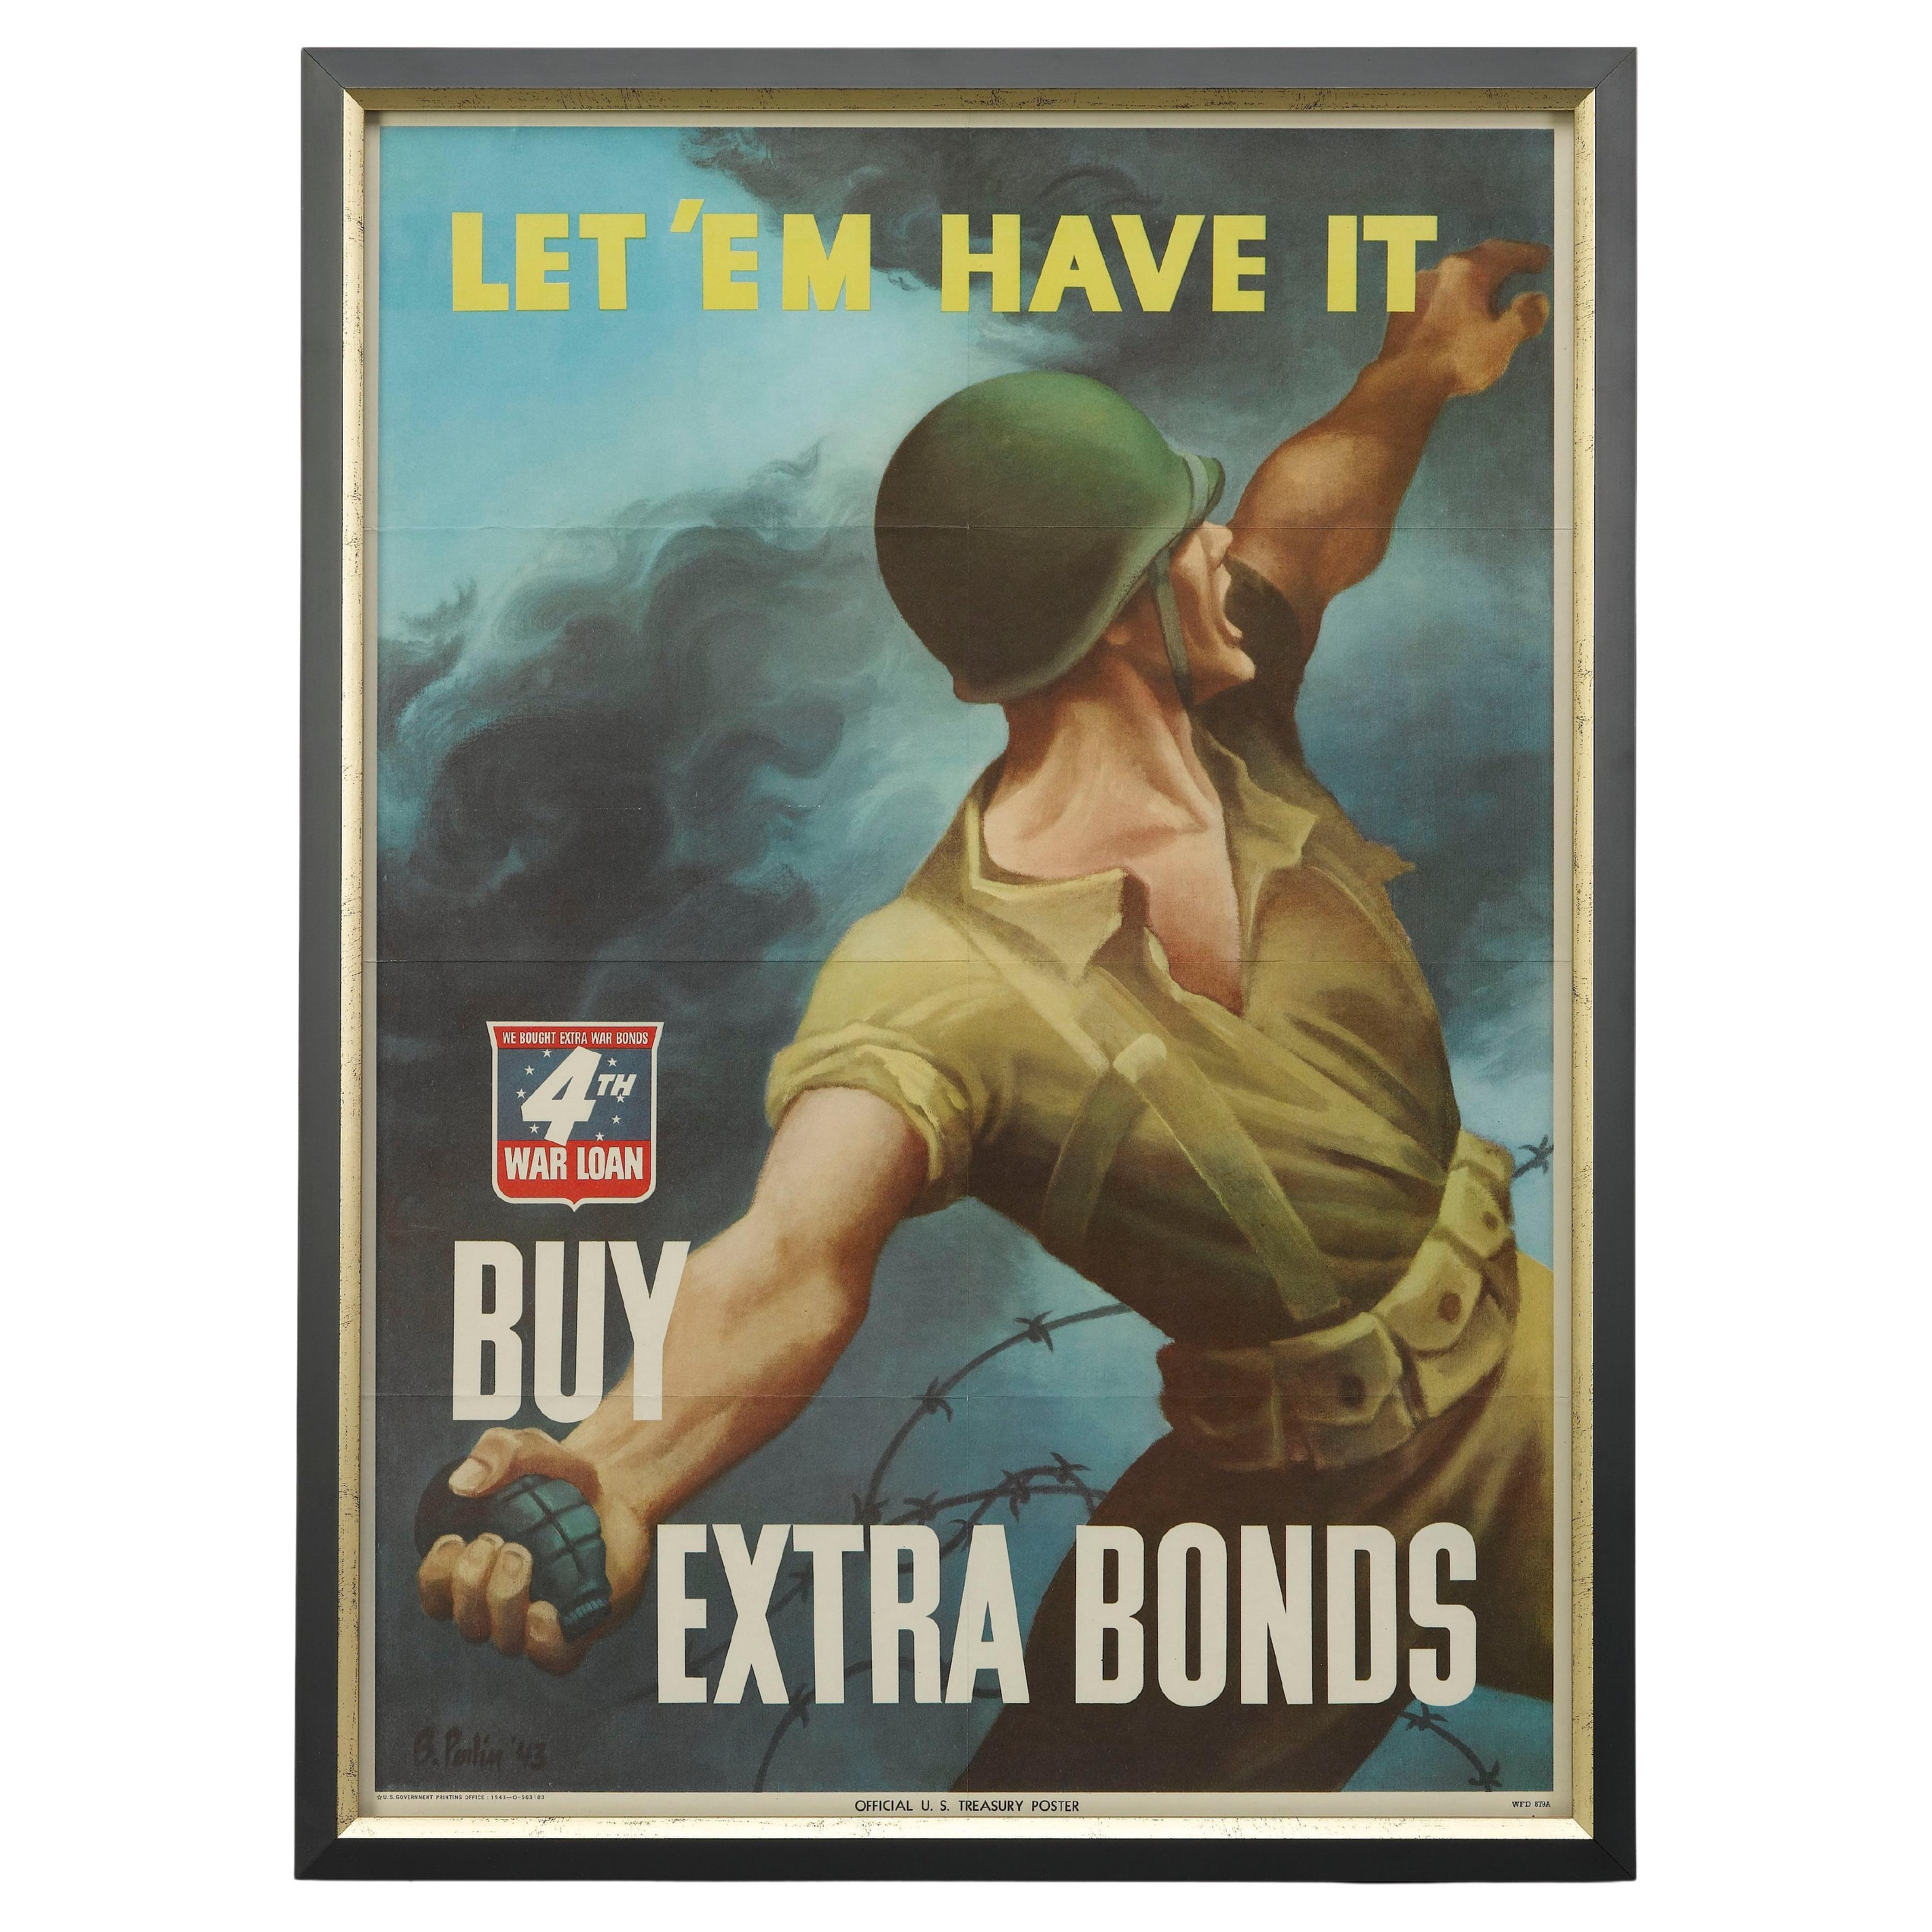 What was the most famous World War II propaganda poster?